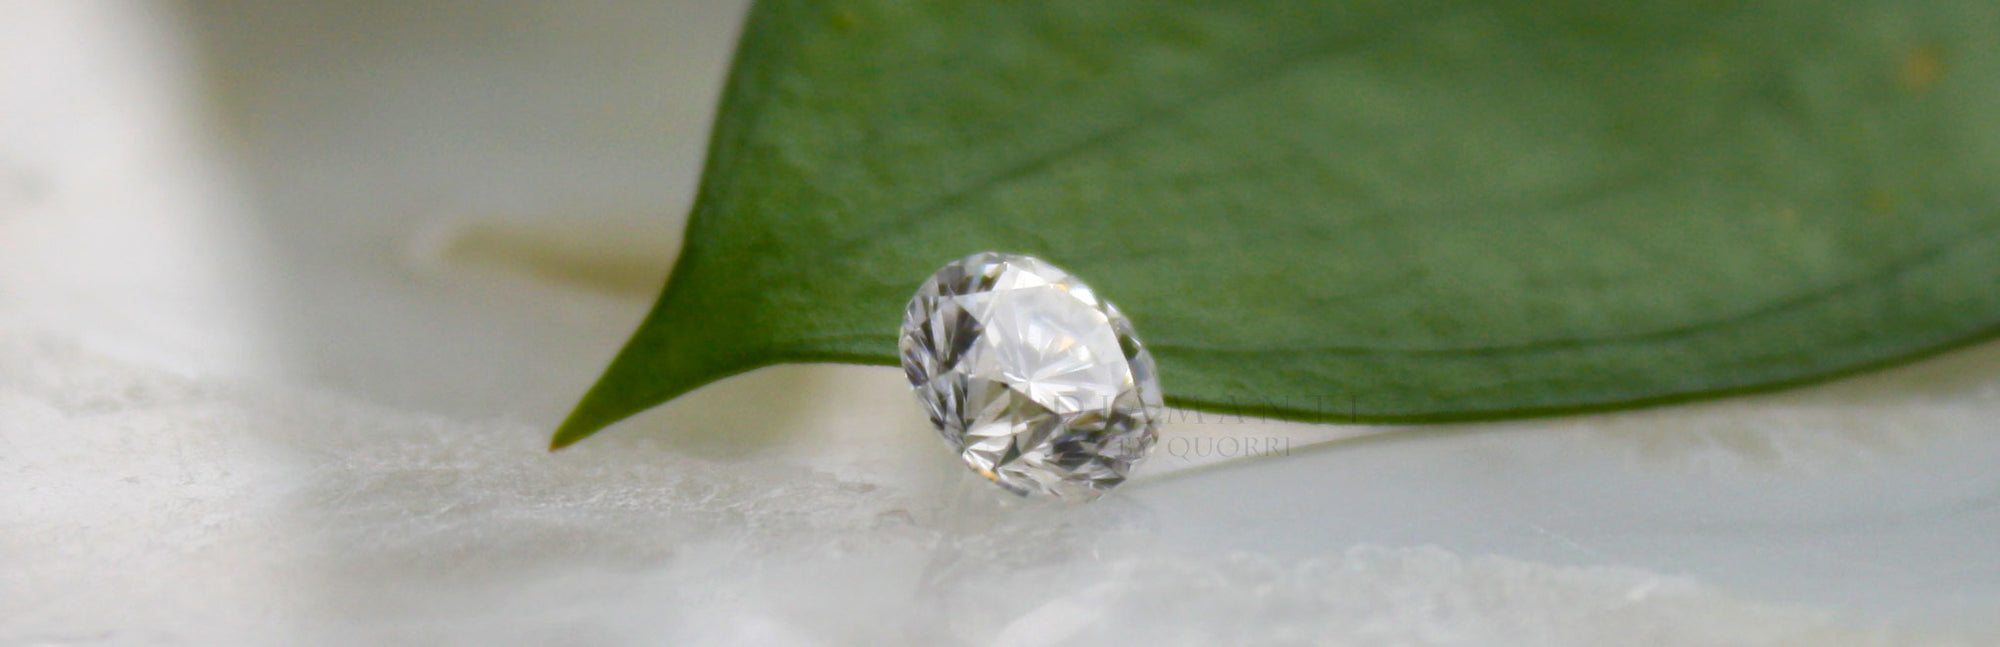 affordable lab grown diamonds and gems gallery Quorri